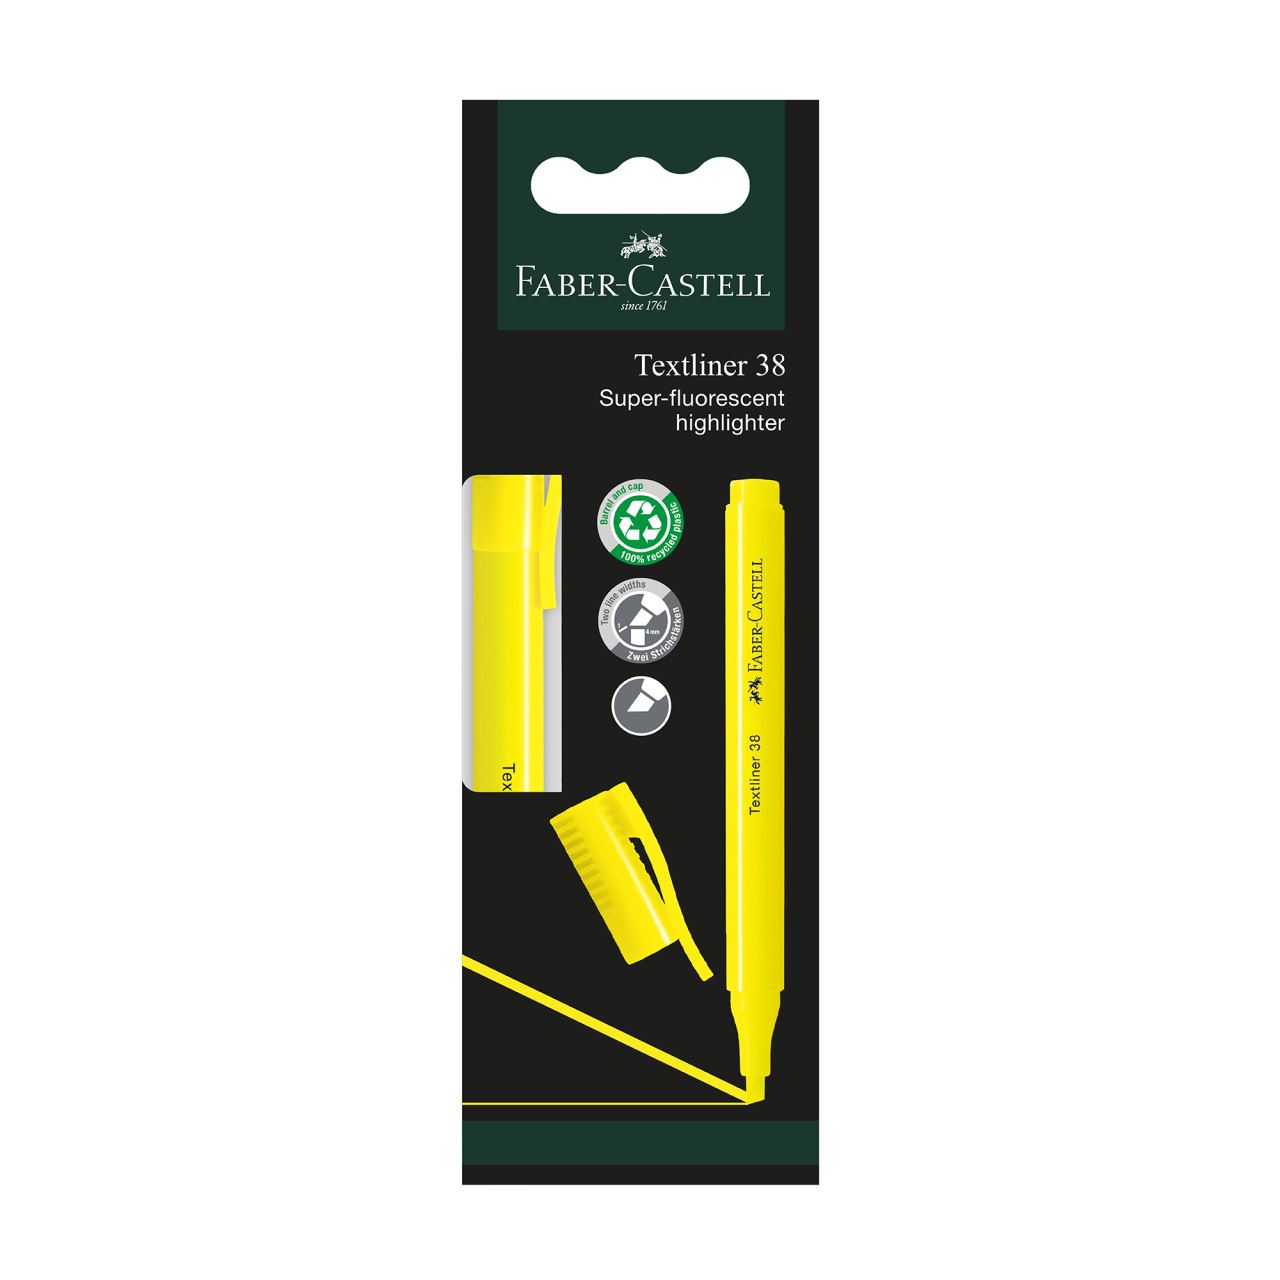 Faber-Castell - Textliner 38, yellow